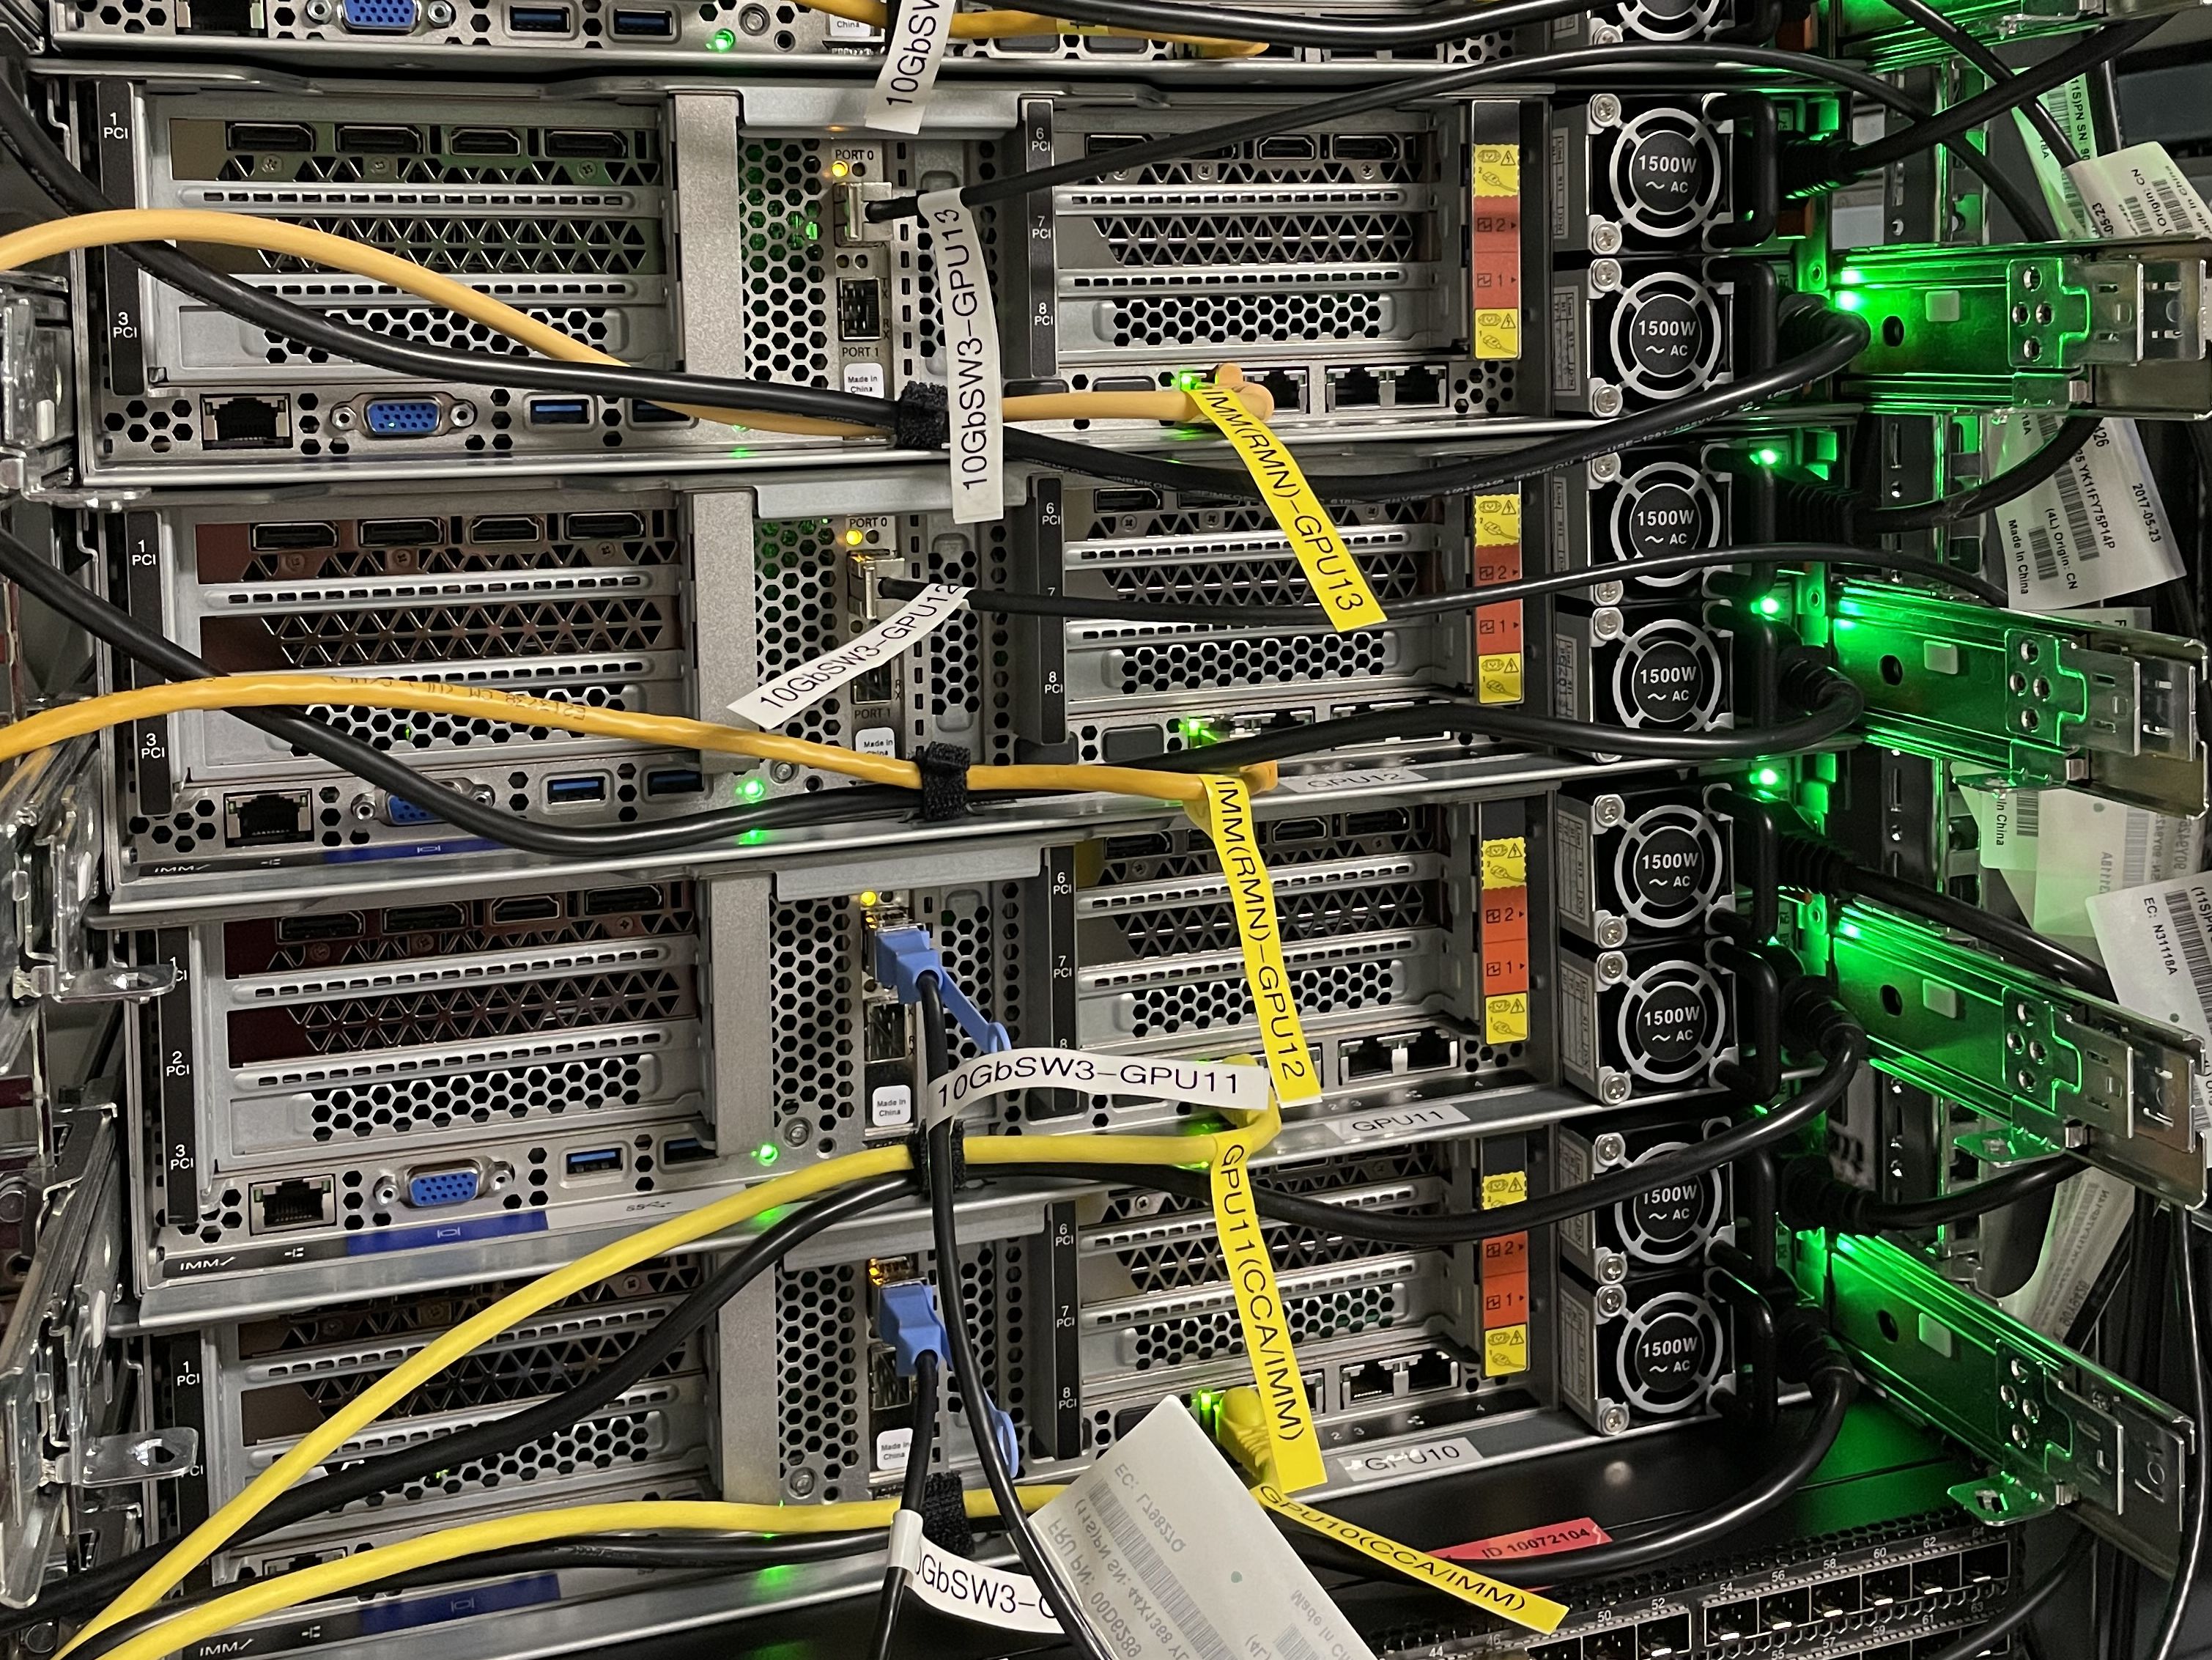 View of the HPC GPU Cluster